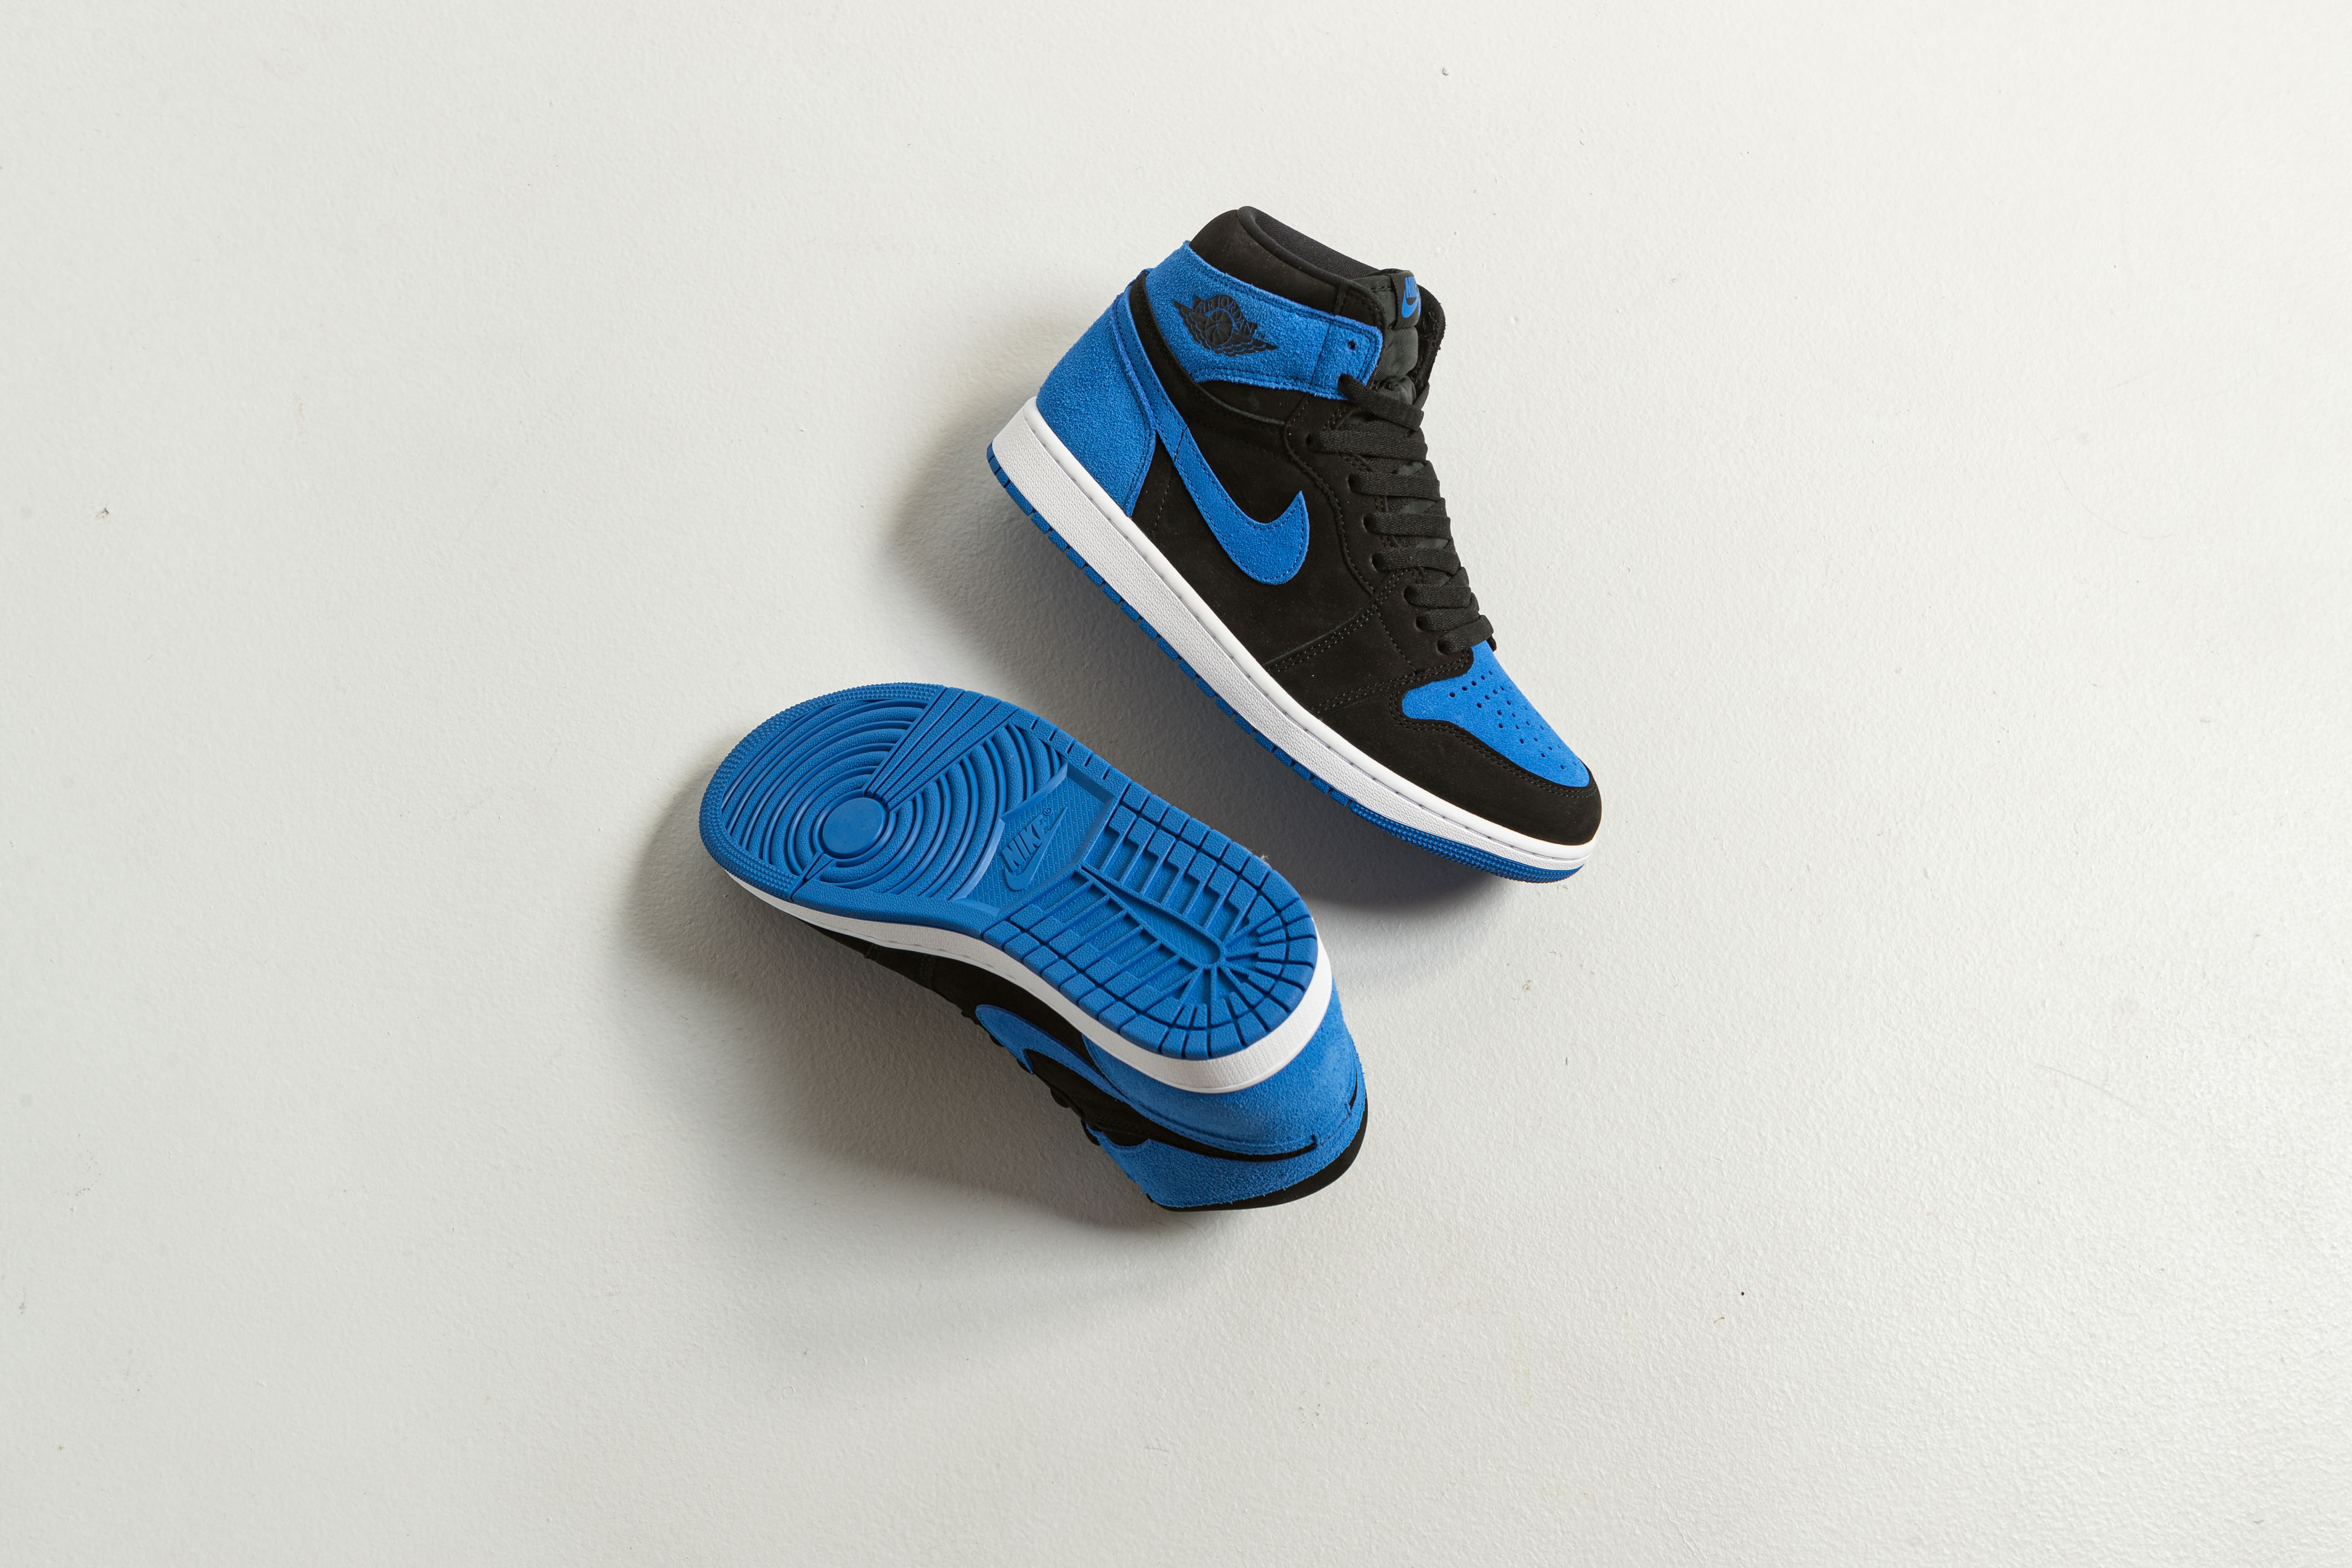 UP THERE Launches - Nike Air Jordan 1 Retro High OG 'Reimagined' - Black/Royal Blue-White